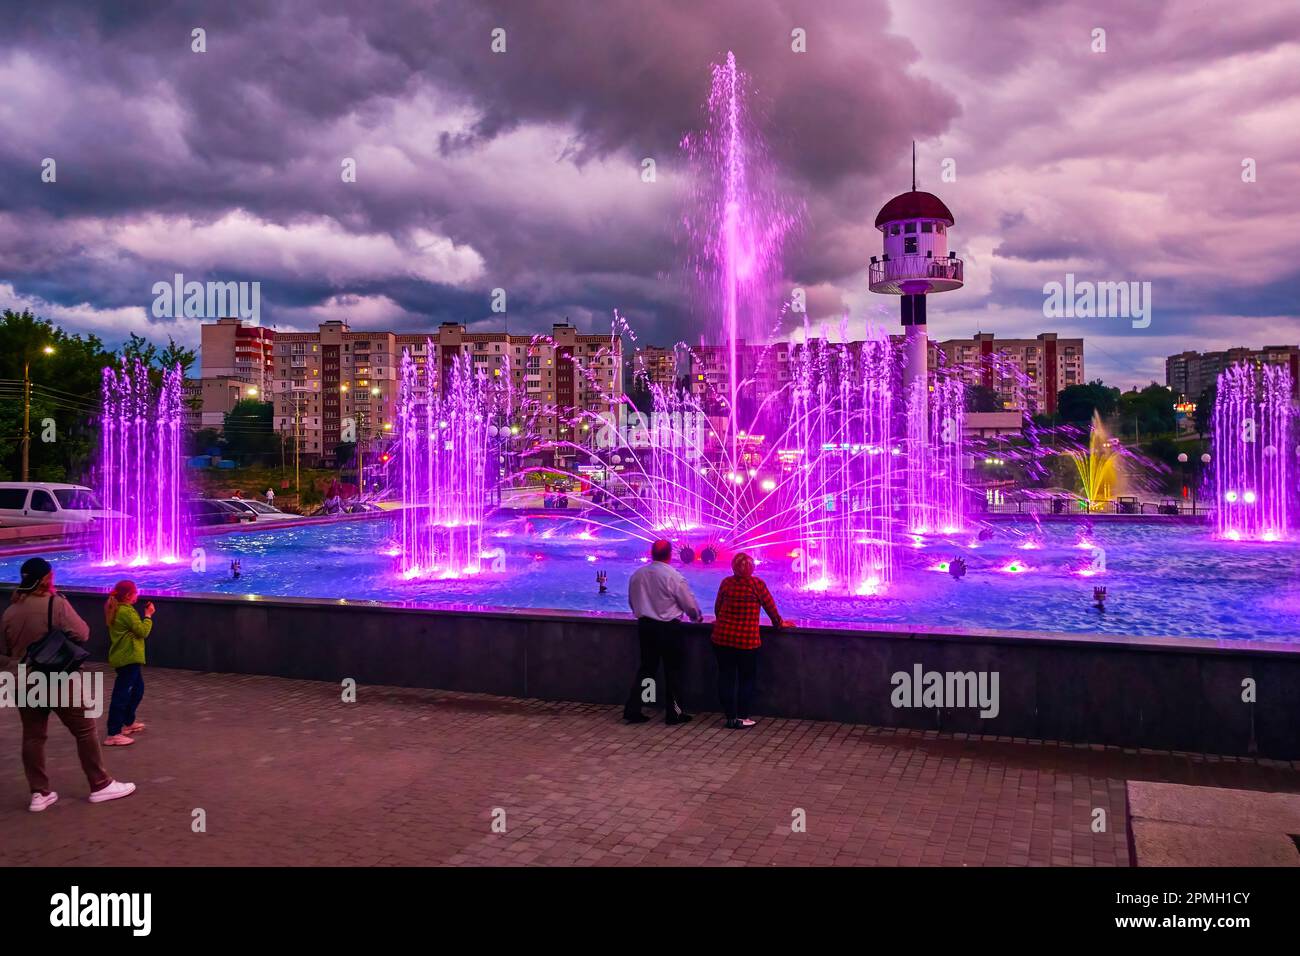 The night view on 'Pearl of Love' fountain in central park of Uman, Ukraine Stock Photo